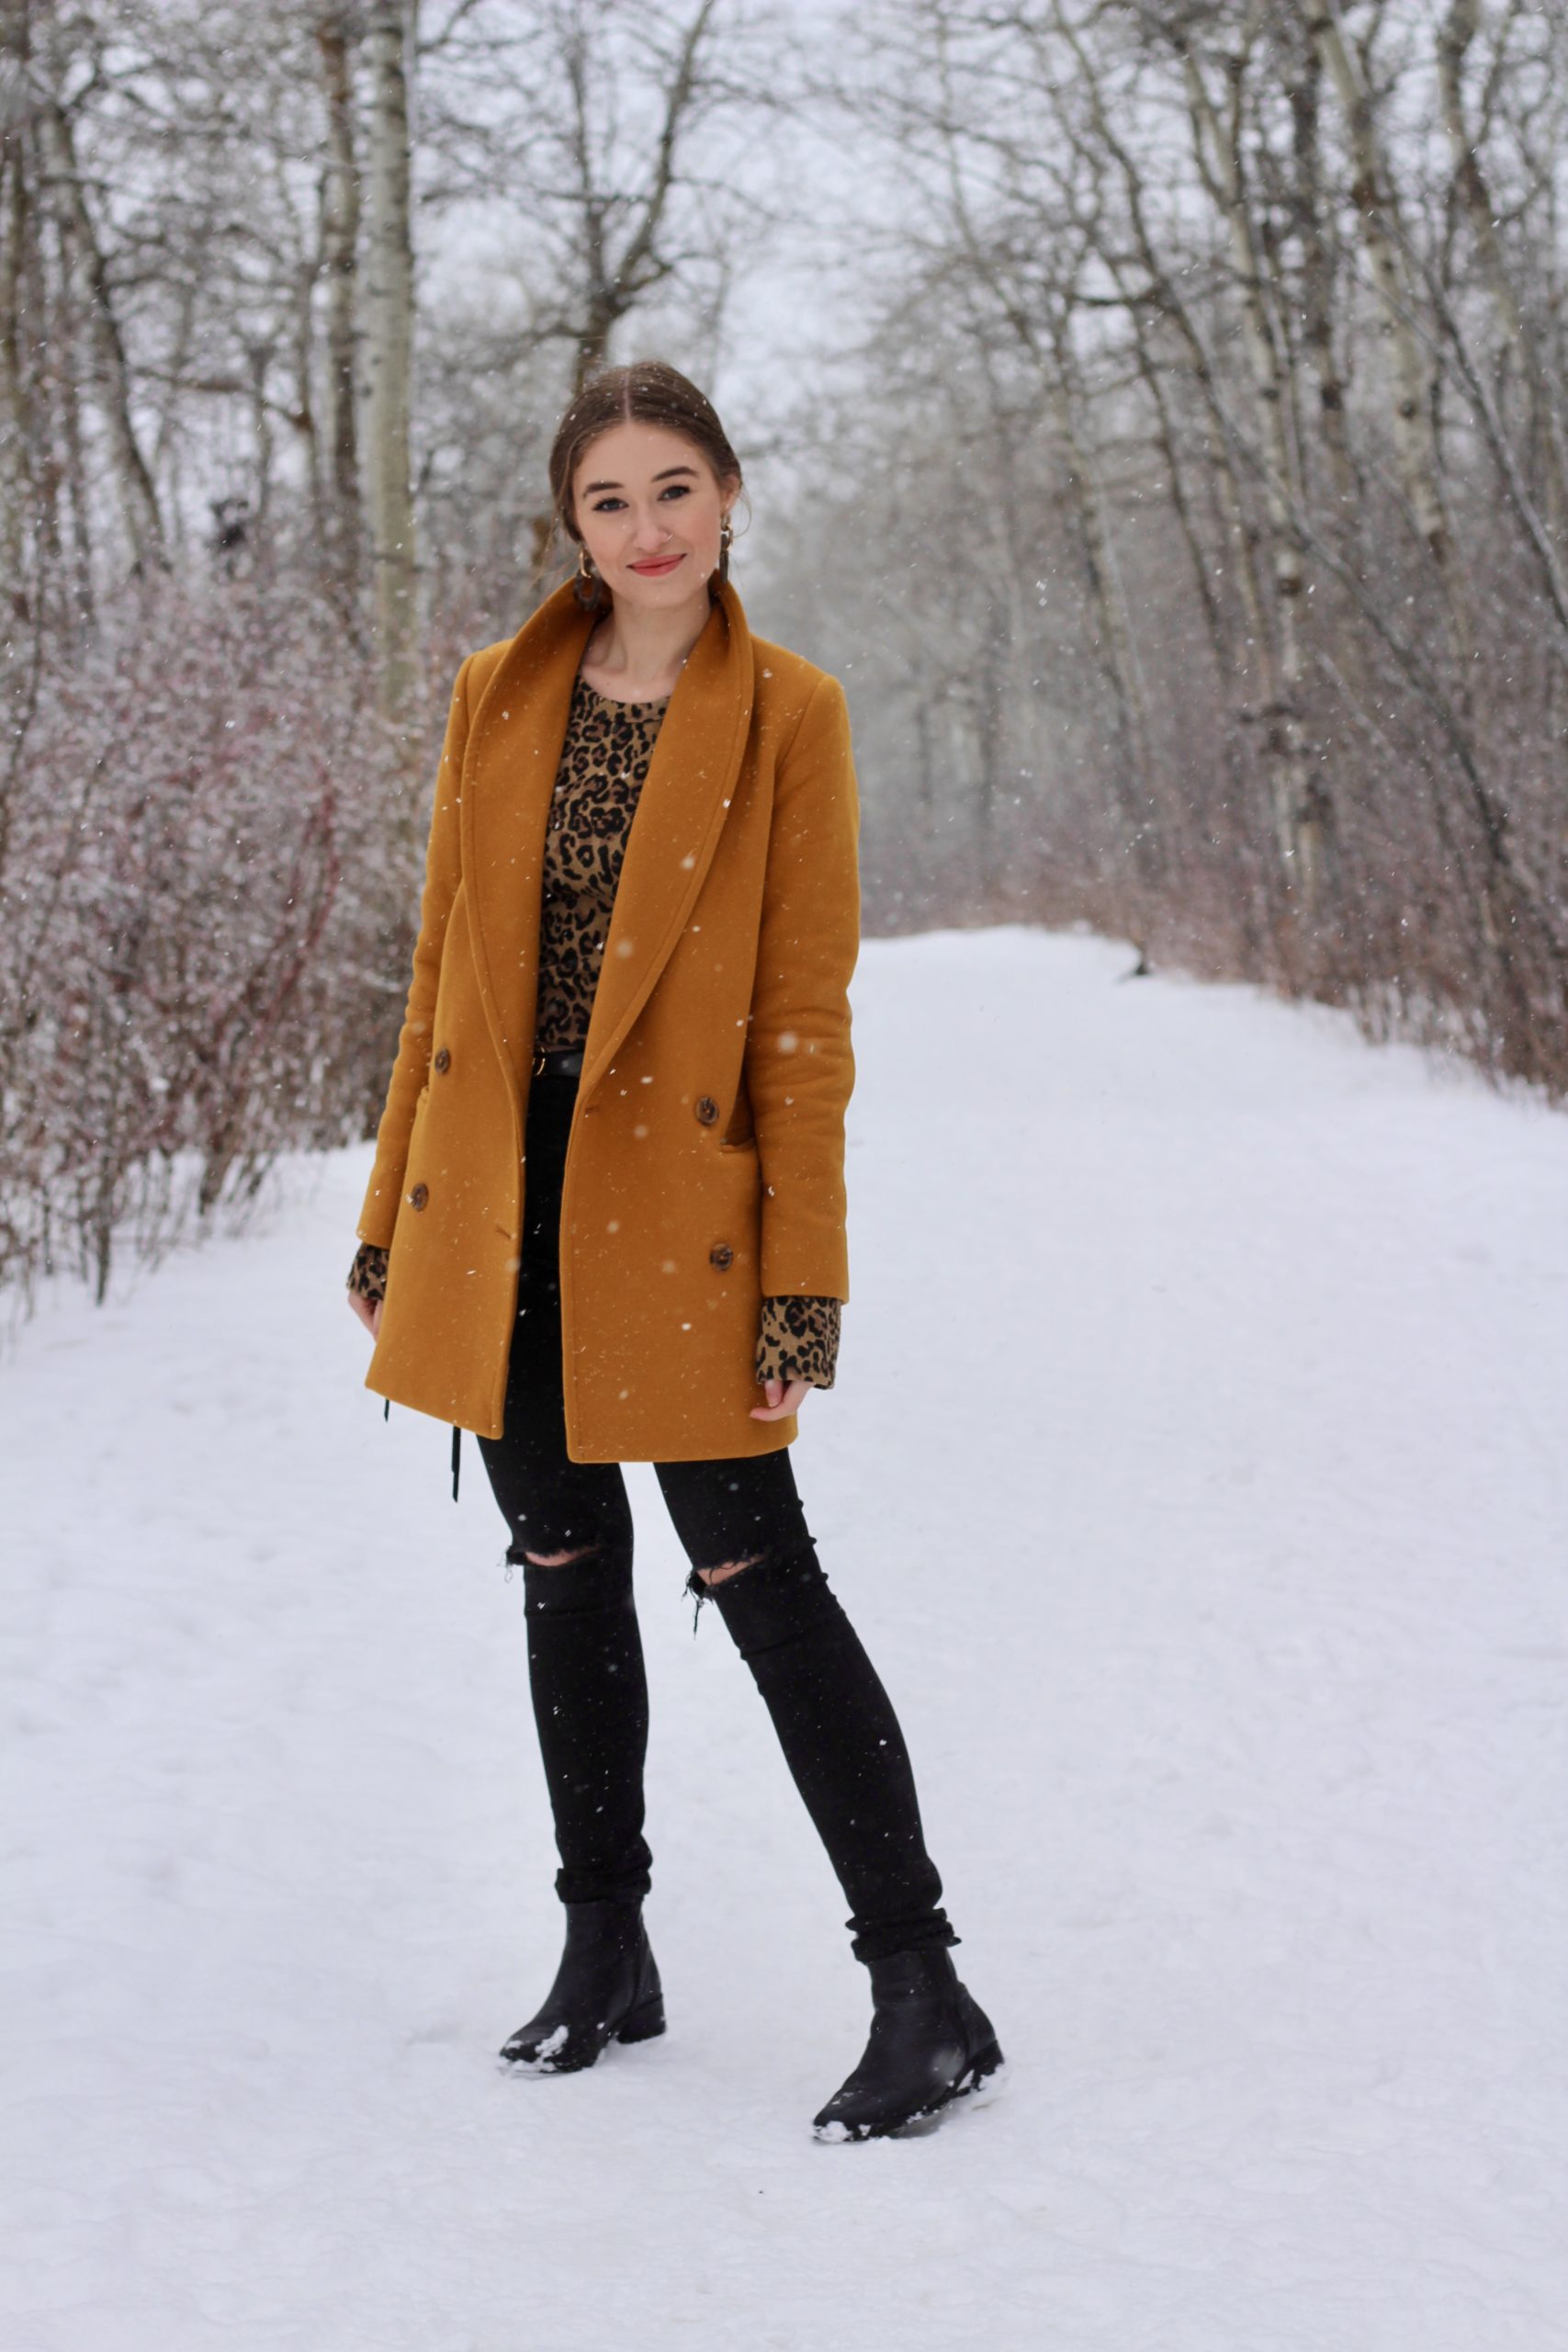 outfit featuring aritzia reeves coat, zara cheetah print shirt, citizens of humanity rockets and frank and oak leather boots